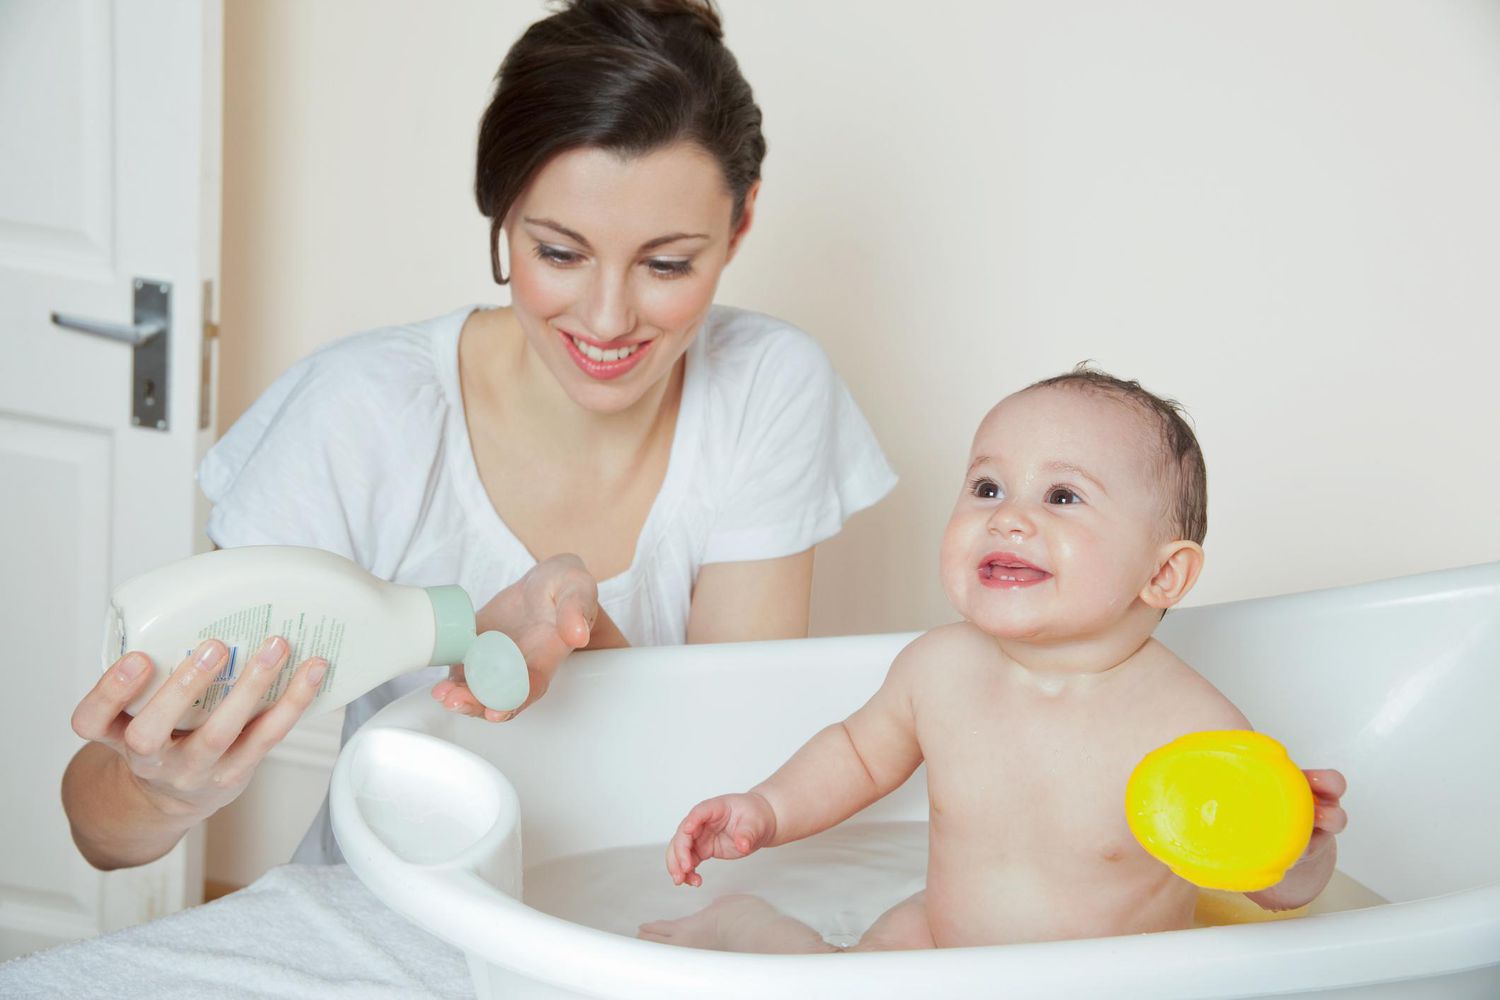 Baby Bath Tub Review: Find the Perfect Tub for Your Little One